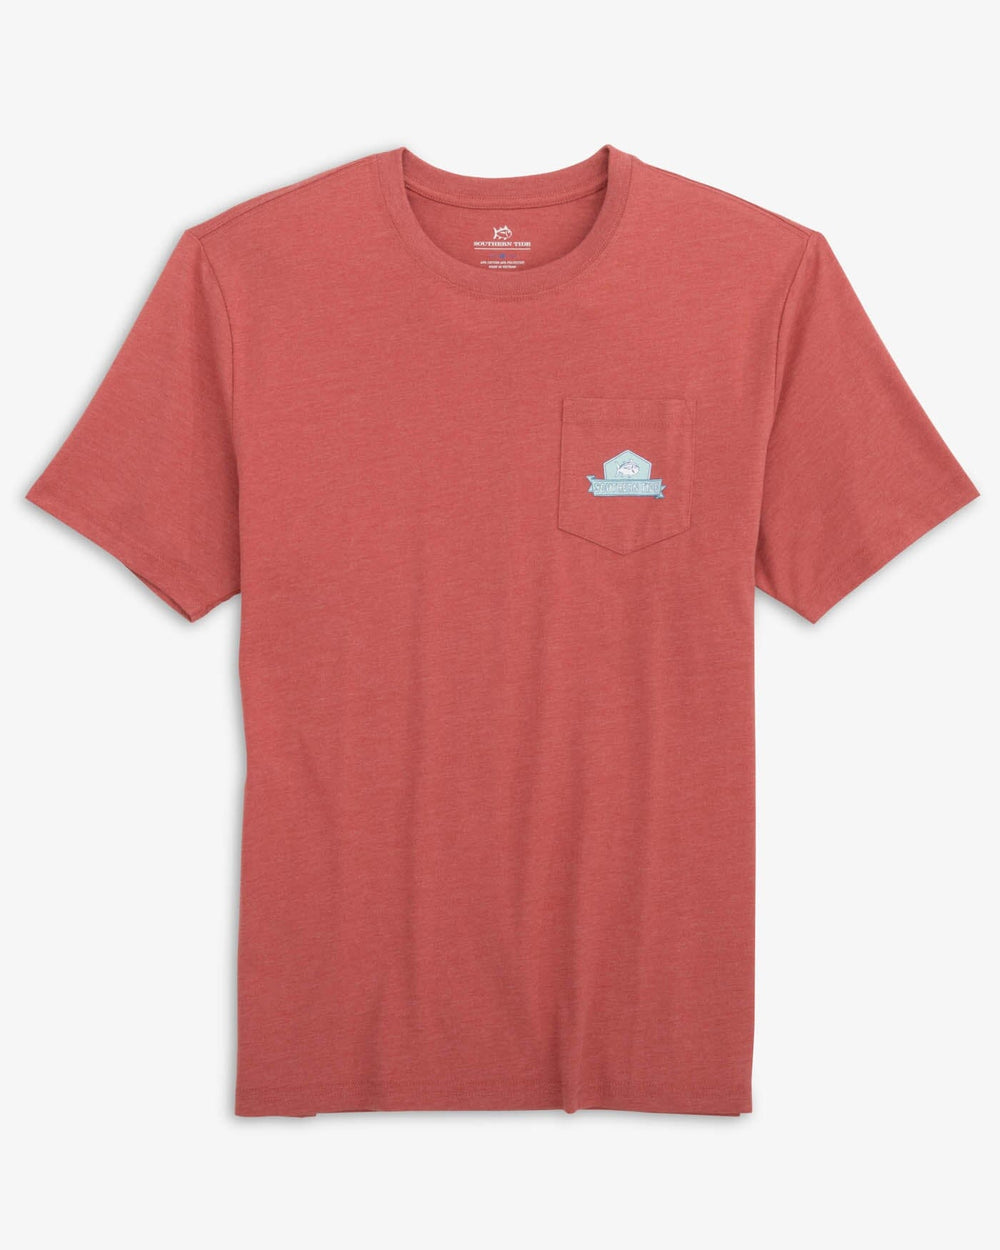 The front view of the Southern Tide Heather Southern Tide Cruise T-Shirt by Southern Tide - Heather Dusty Coral